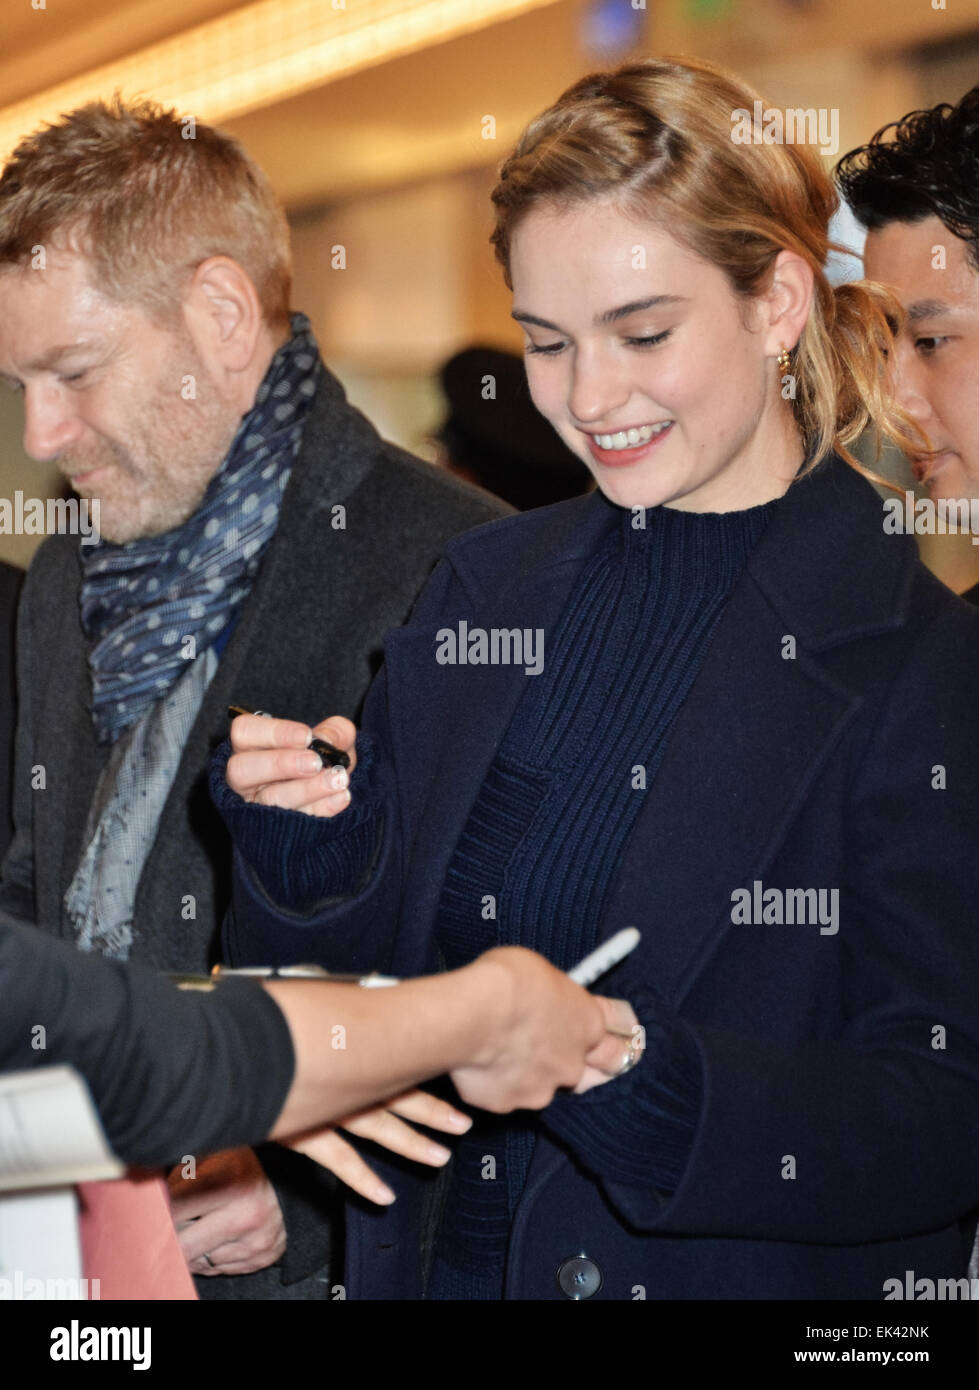 Lily James, Kenneth Branagh, April 6, 2015, Tokyo, Japan: Actress Lily James and director Kenneth Branagh arrive at Haneda International Airport in Tokyo, Japan, on April 6, 2015. Stock Photo